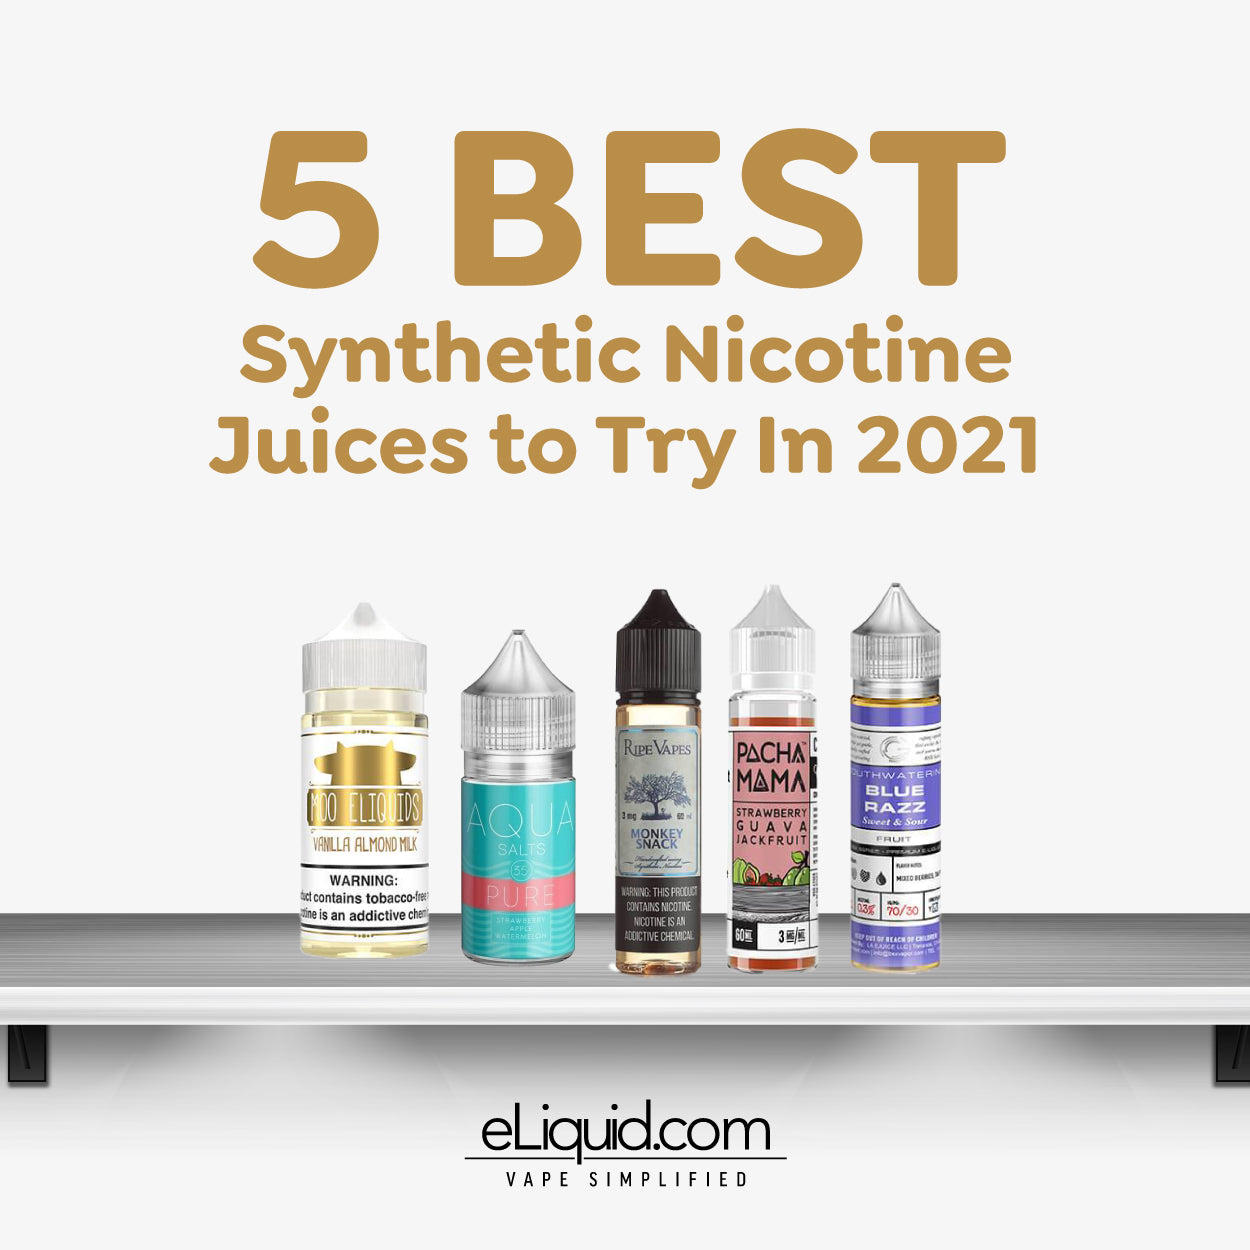 5 Best Synthetic Nicotine Juices to Try in 2021